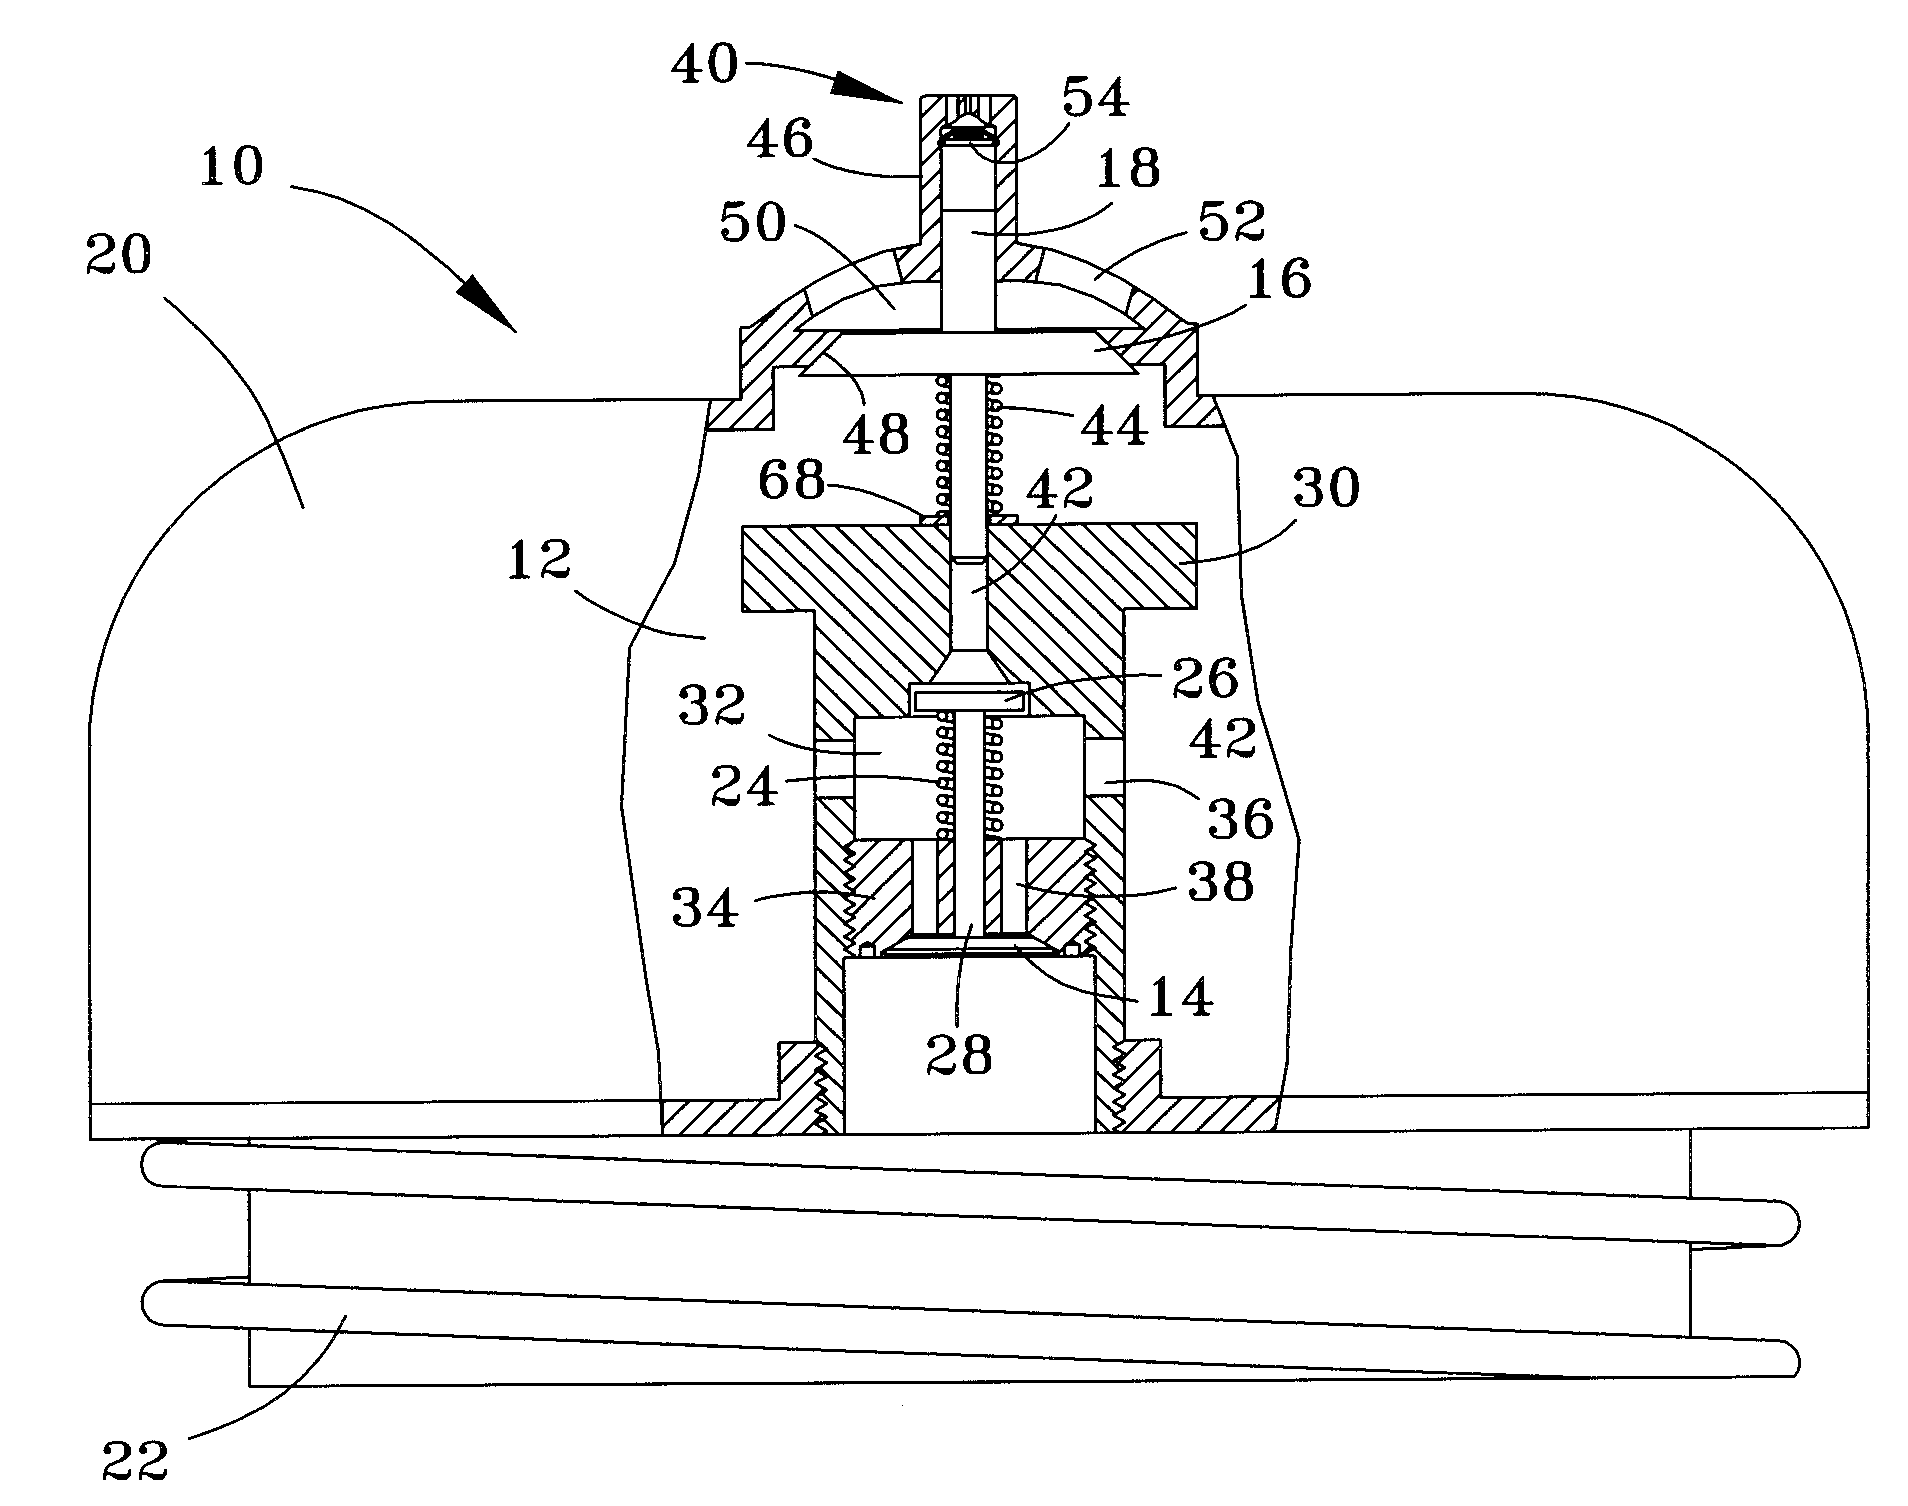 Vacuum relief unit and method for a pool